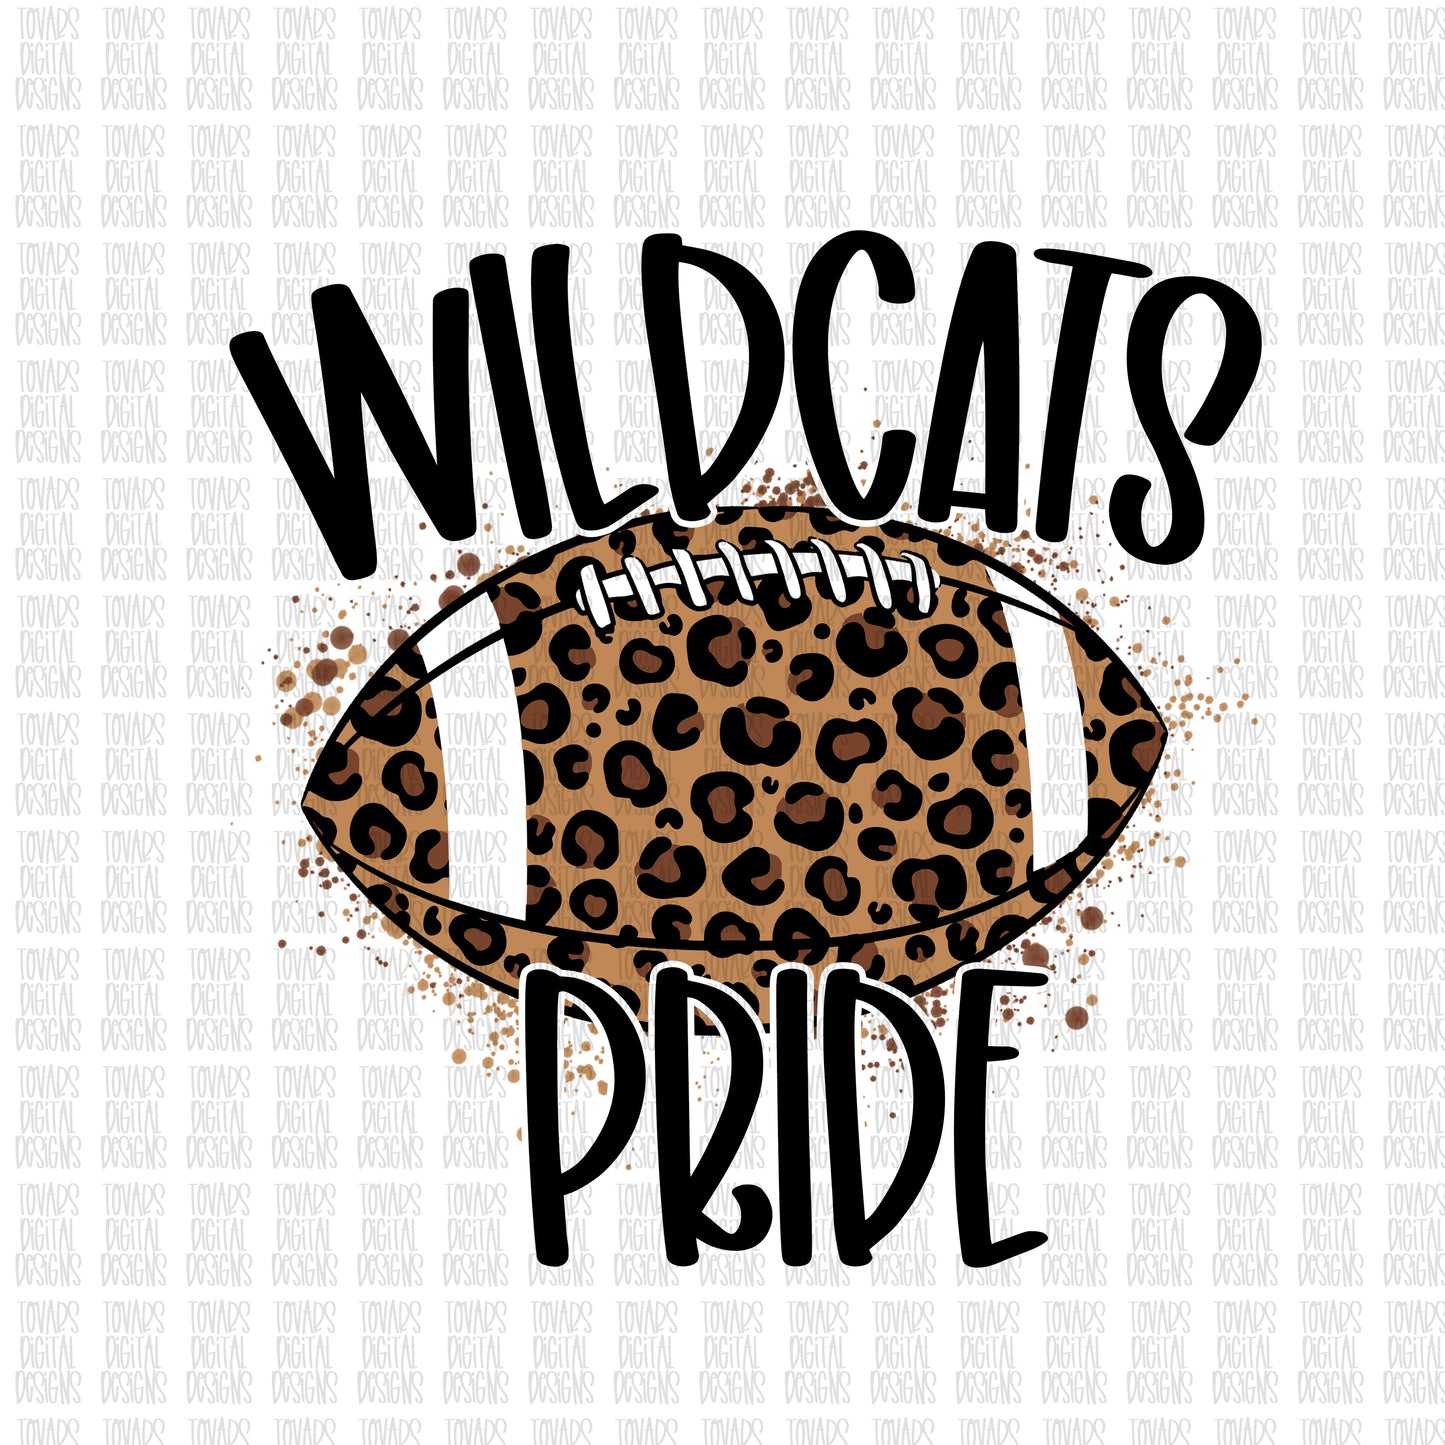 Wildcats Pride Football, Wildcats Football png, Wildcats pride png, leopard football, leopard football png, sublimation design, dtg printing